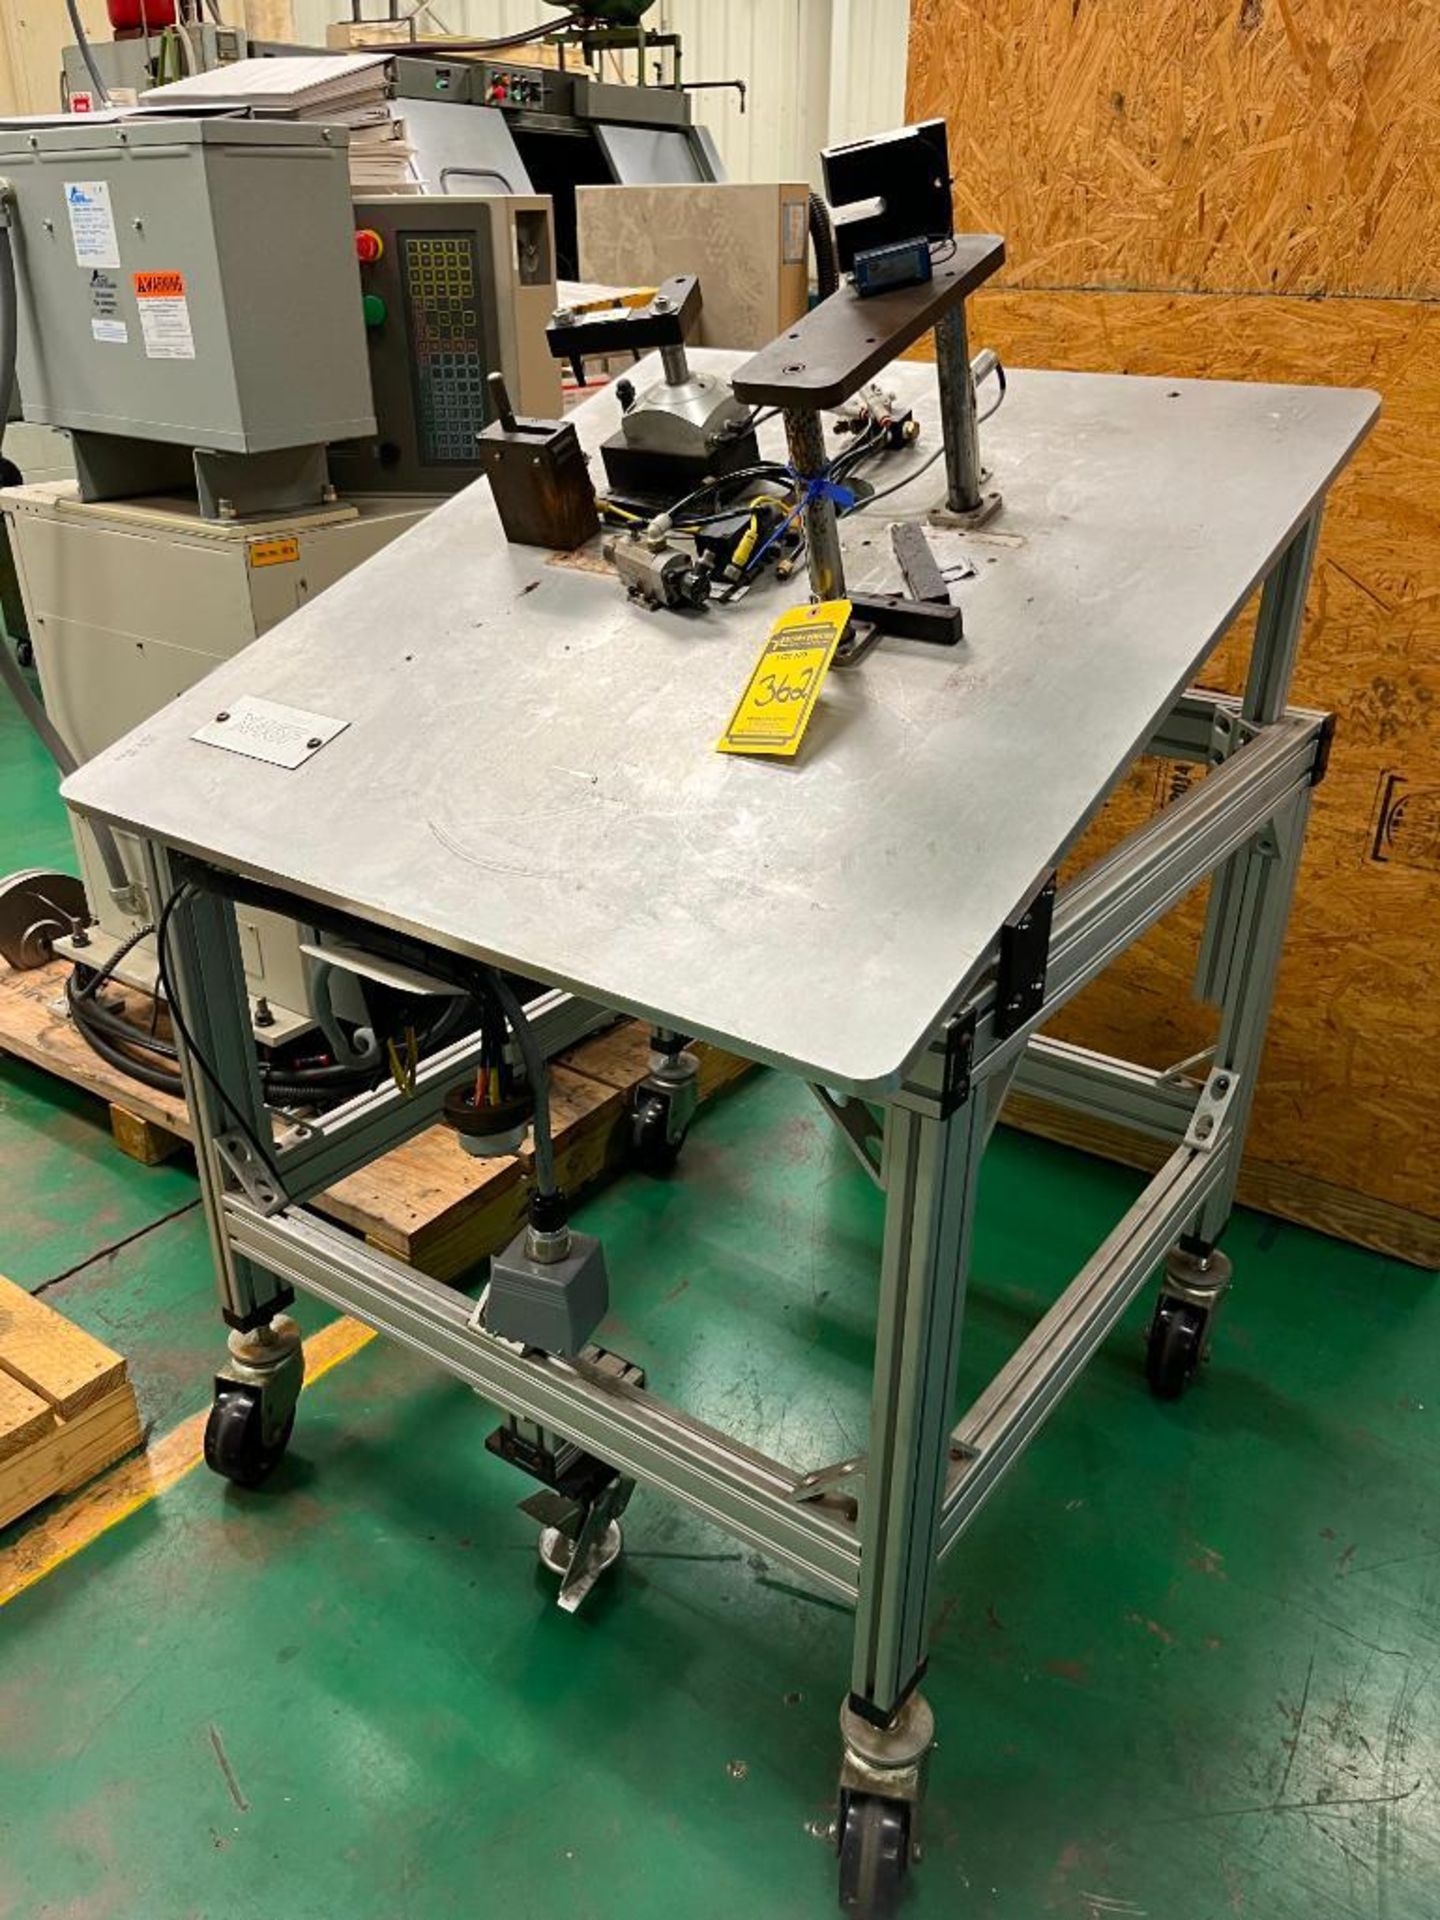 80/20 Pneumatic Press Assembly Fixture, 36" X 36", Steel Plate Top - Image 2 of 4